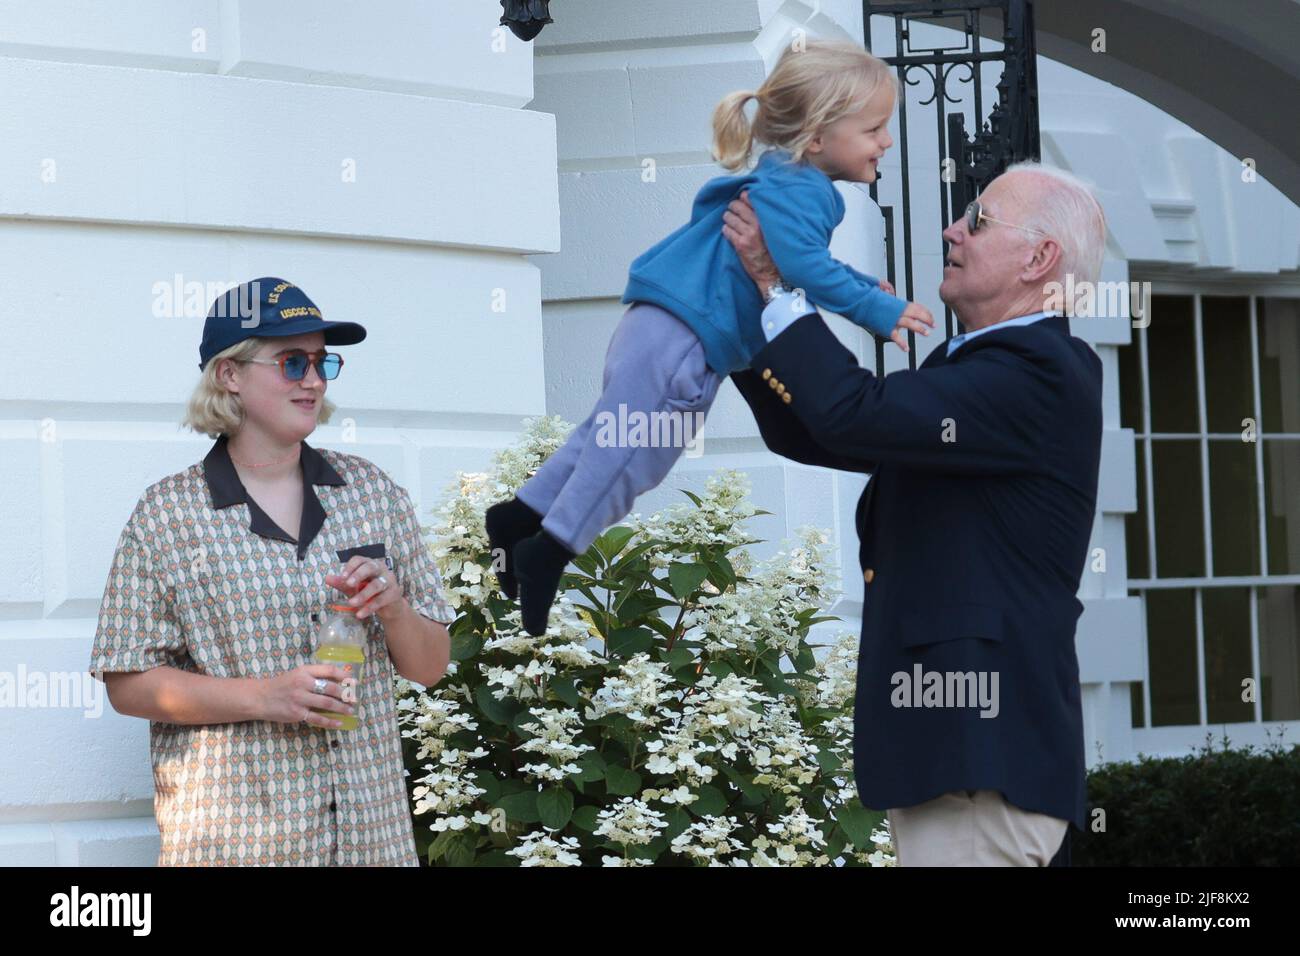 Washington, USA. 30th June, 2022. President Joe Biden lifts his grandson Beau Biden, center, the son of Hunter Biden, as granddaughter Maisy Biden, left, watches, after Biden returned to Washington, DC on June 30, 2022. Biden returned to Washington after attending summits in Germany and Spain. (Photo by Oliver Contreras/SIPA USA) Credit: Sipa USA/Alamy Live News Stock Photo